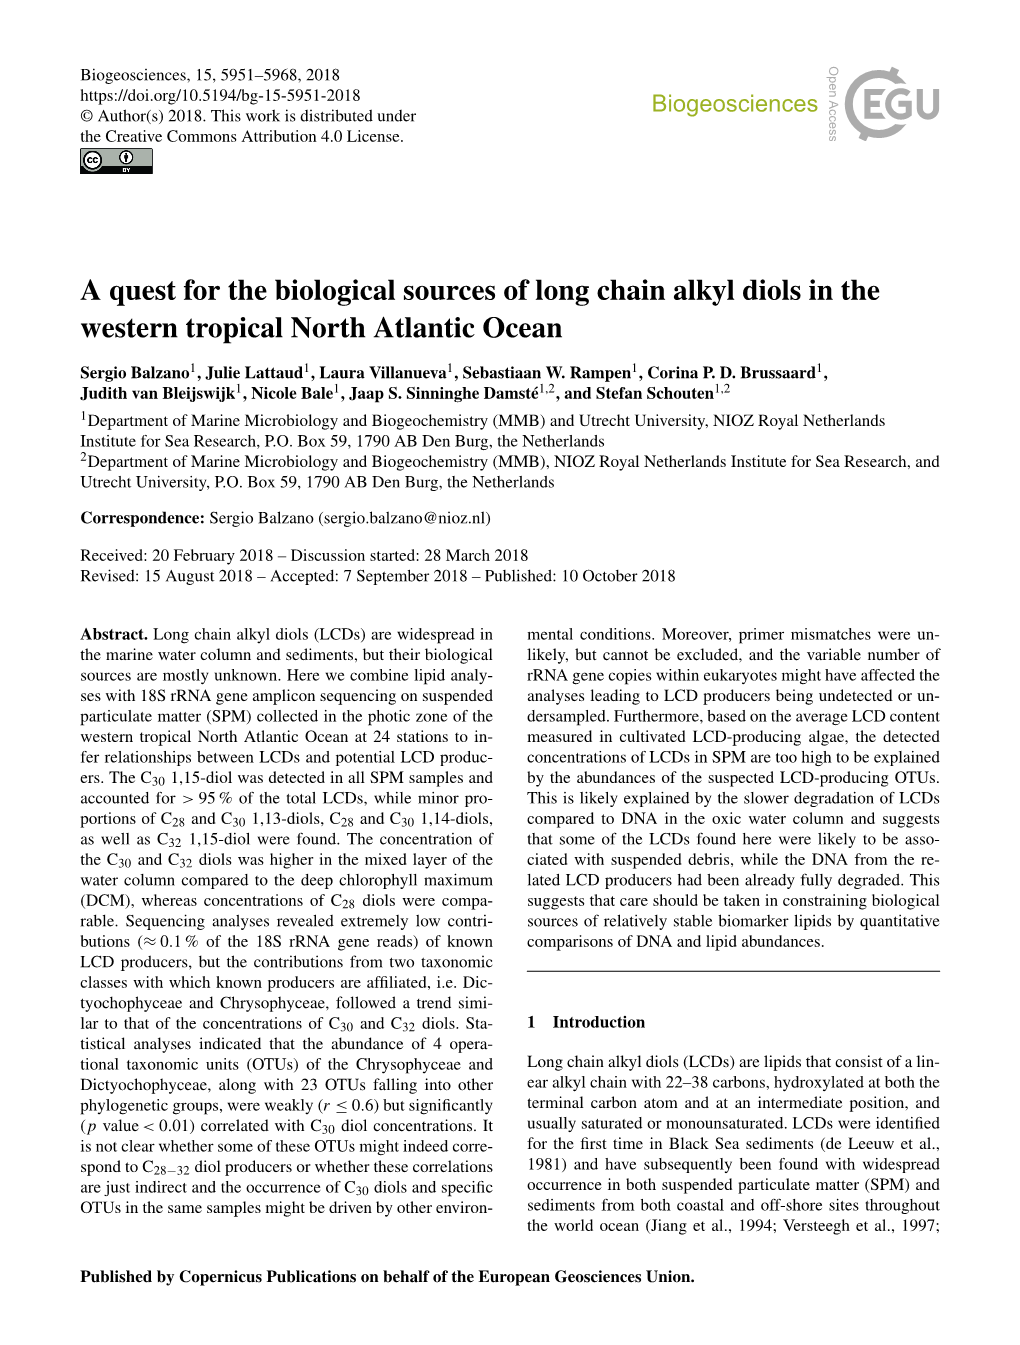 Article Is Available Across the Tropical North Atlantic, Biogeosciences, 15, 1229– Online At